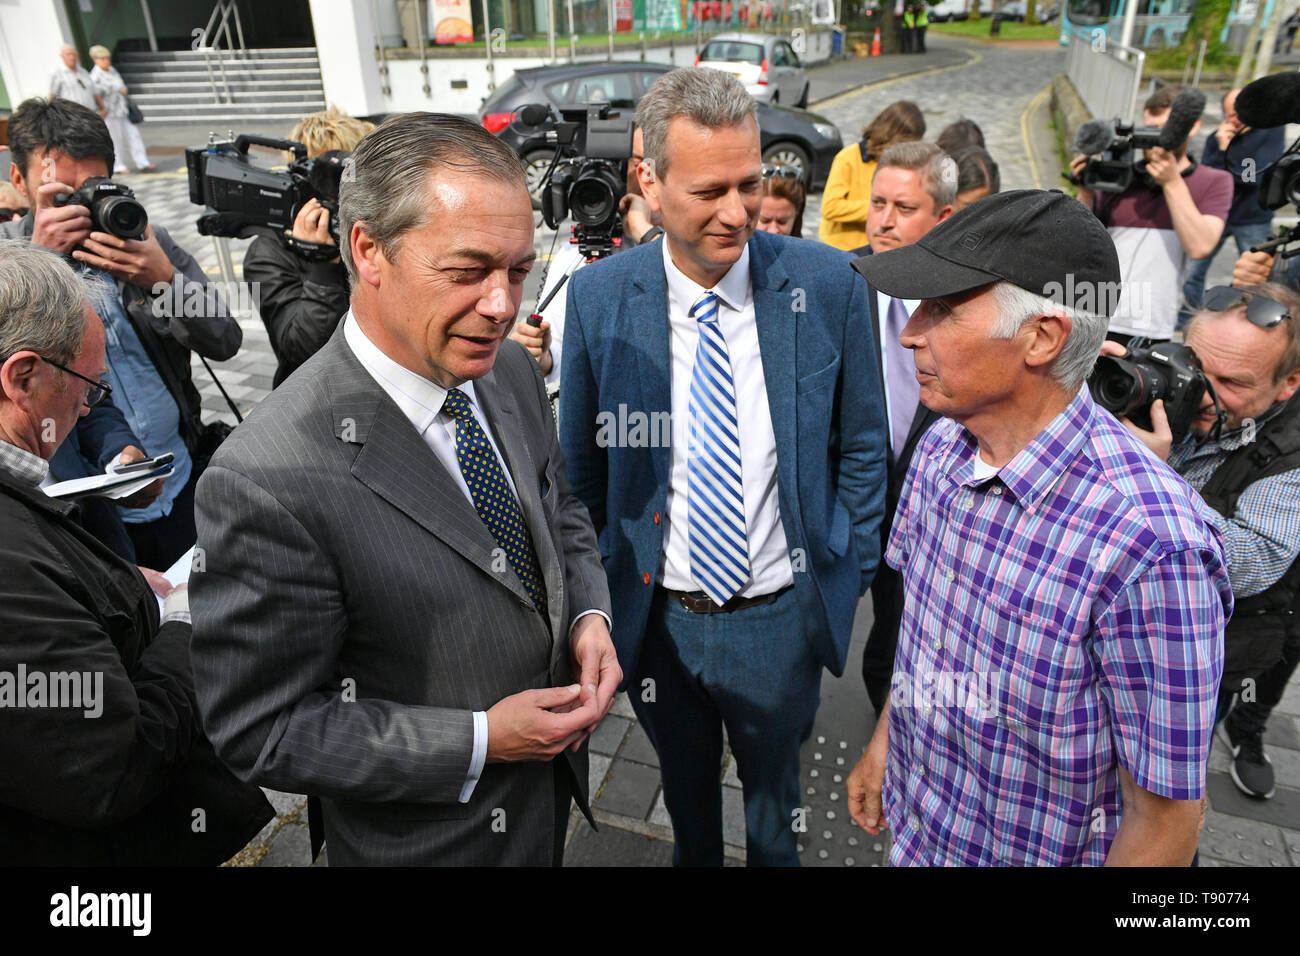 Brexit Party leader Nigel Farage during a walkabout in Merthyr Tydfil, Wales. Stock Photo